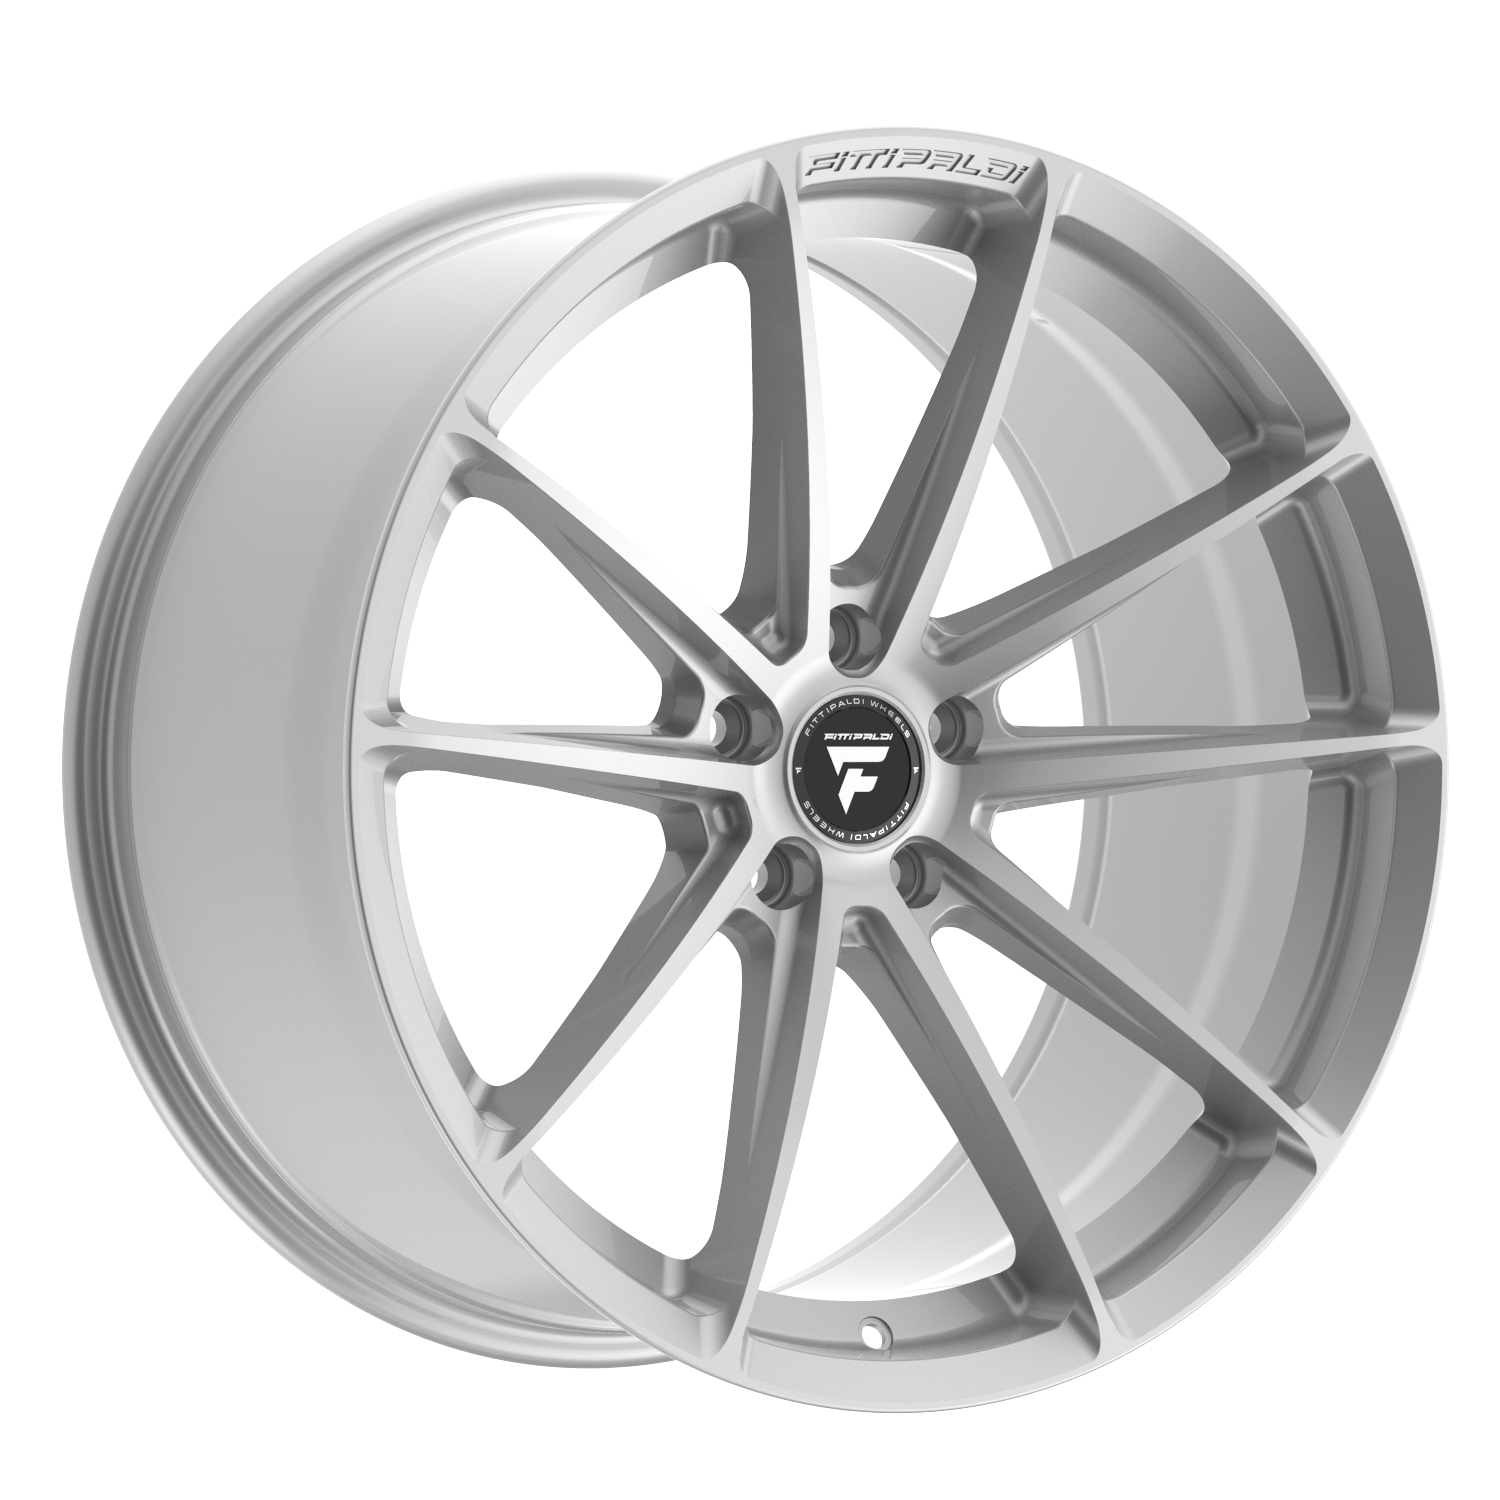 FITTIPALDI 362S 20X10 +37 5X120 Brushed Silver